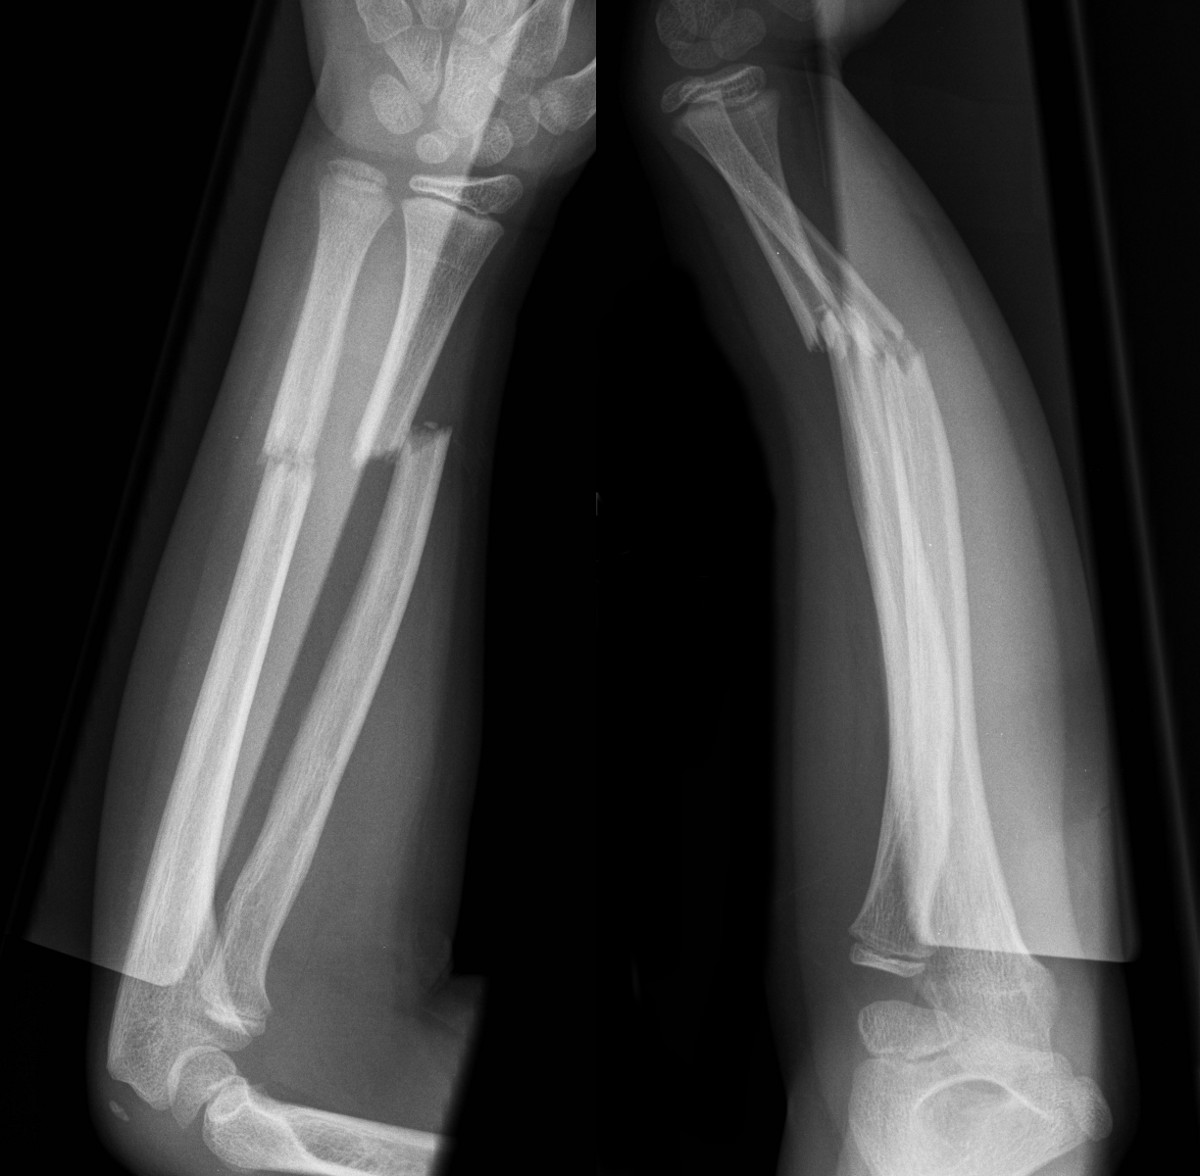 Transverse fractures of radius and ulna with complete displacement of radius and significant dorsal angulation